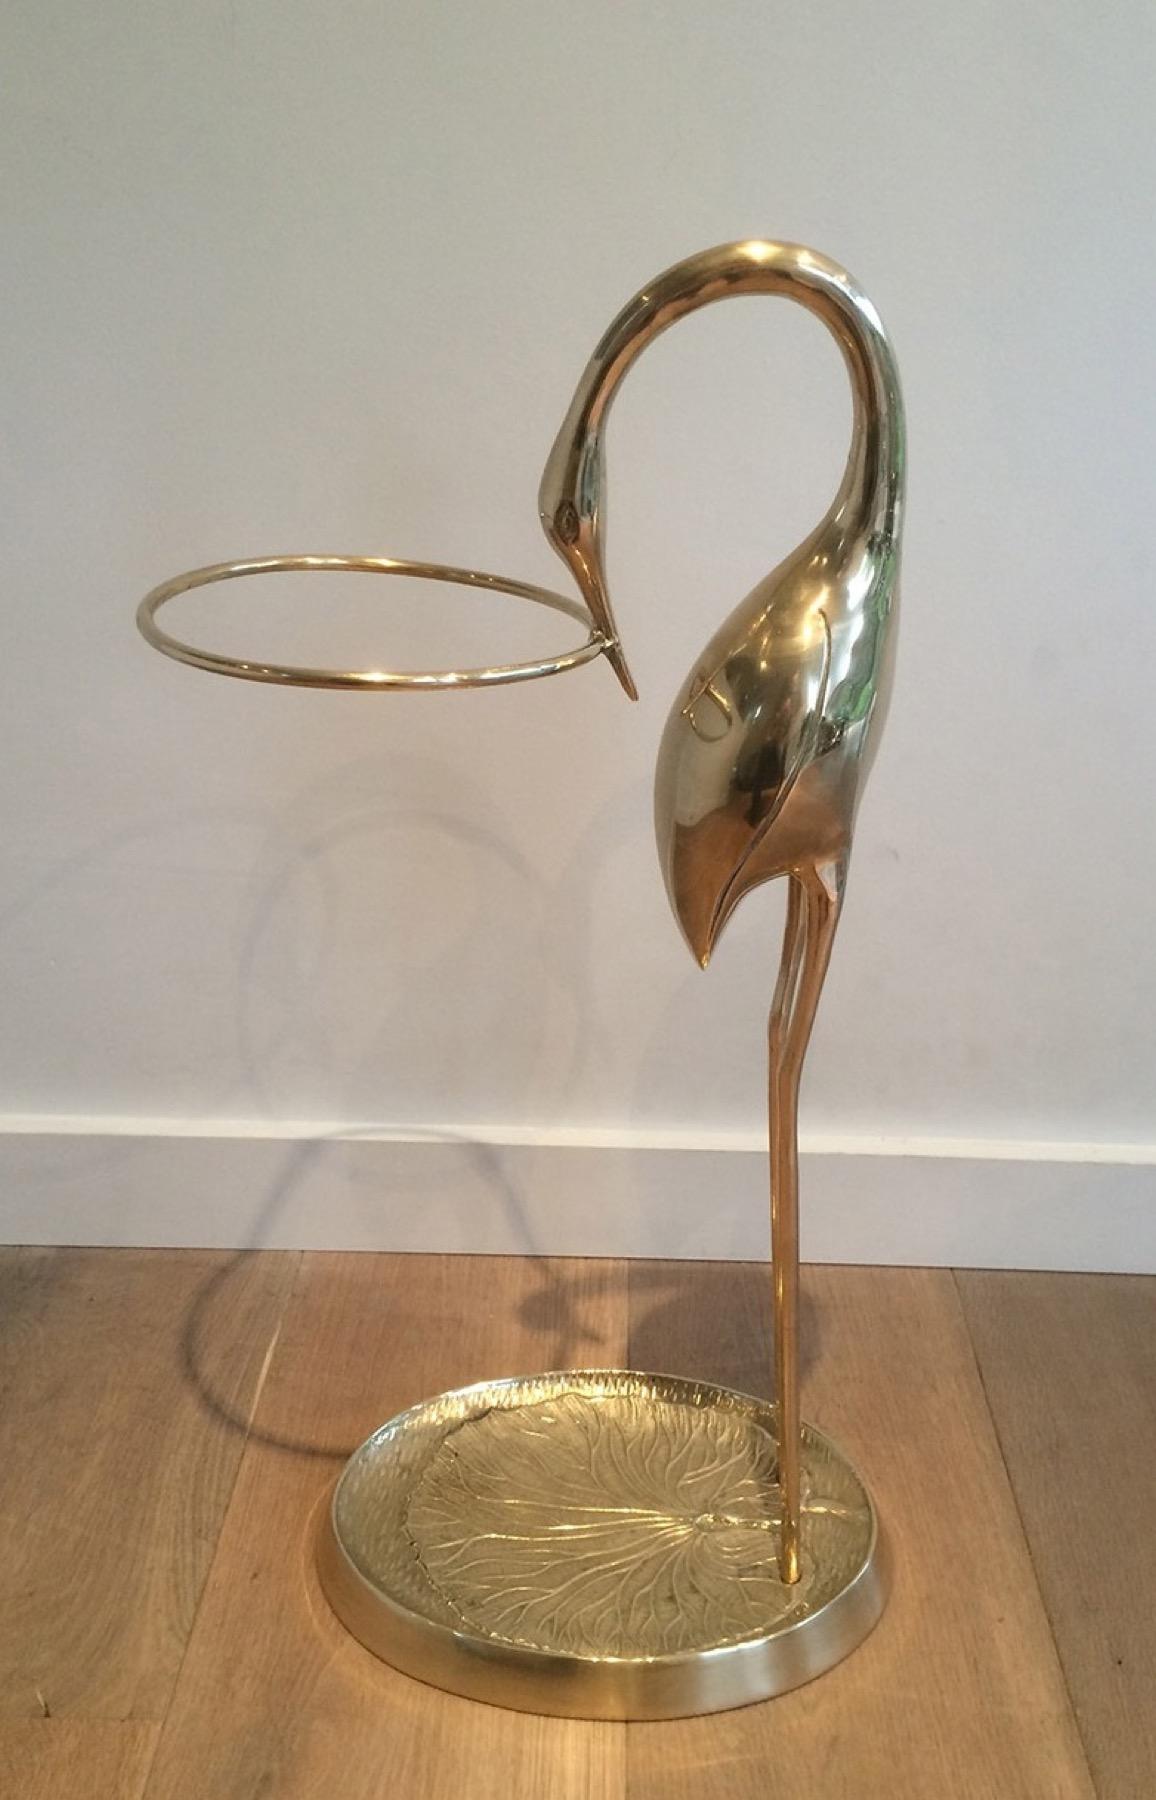 This rare and very elegant swan umbrella stand is all made of brass. This is a finely chiseled French work attributed to famous designer Maison Jansen. Circa 1970.